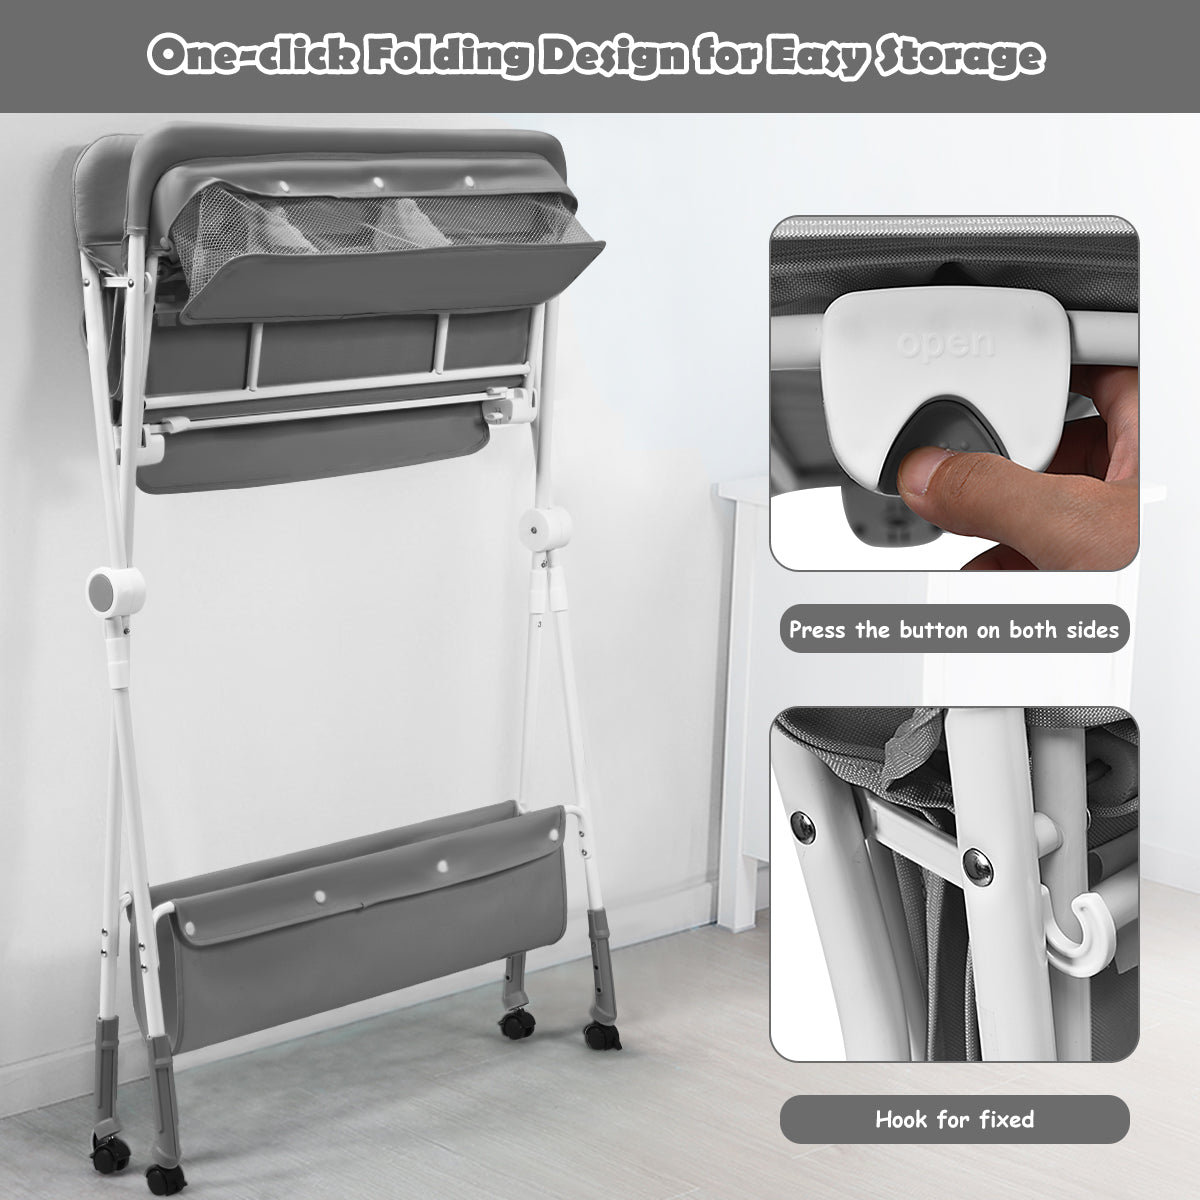 Portable Multi-Purpose Diaper Station - Grey Comfort for Changing Needs